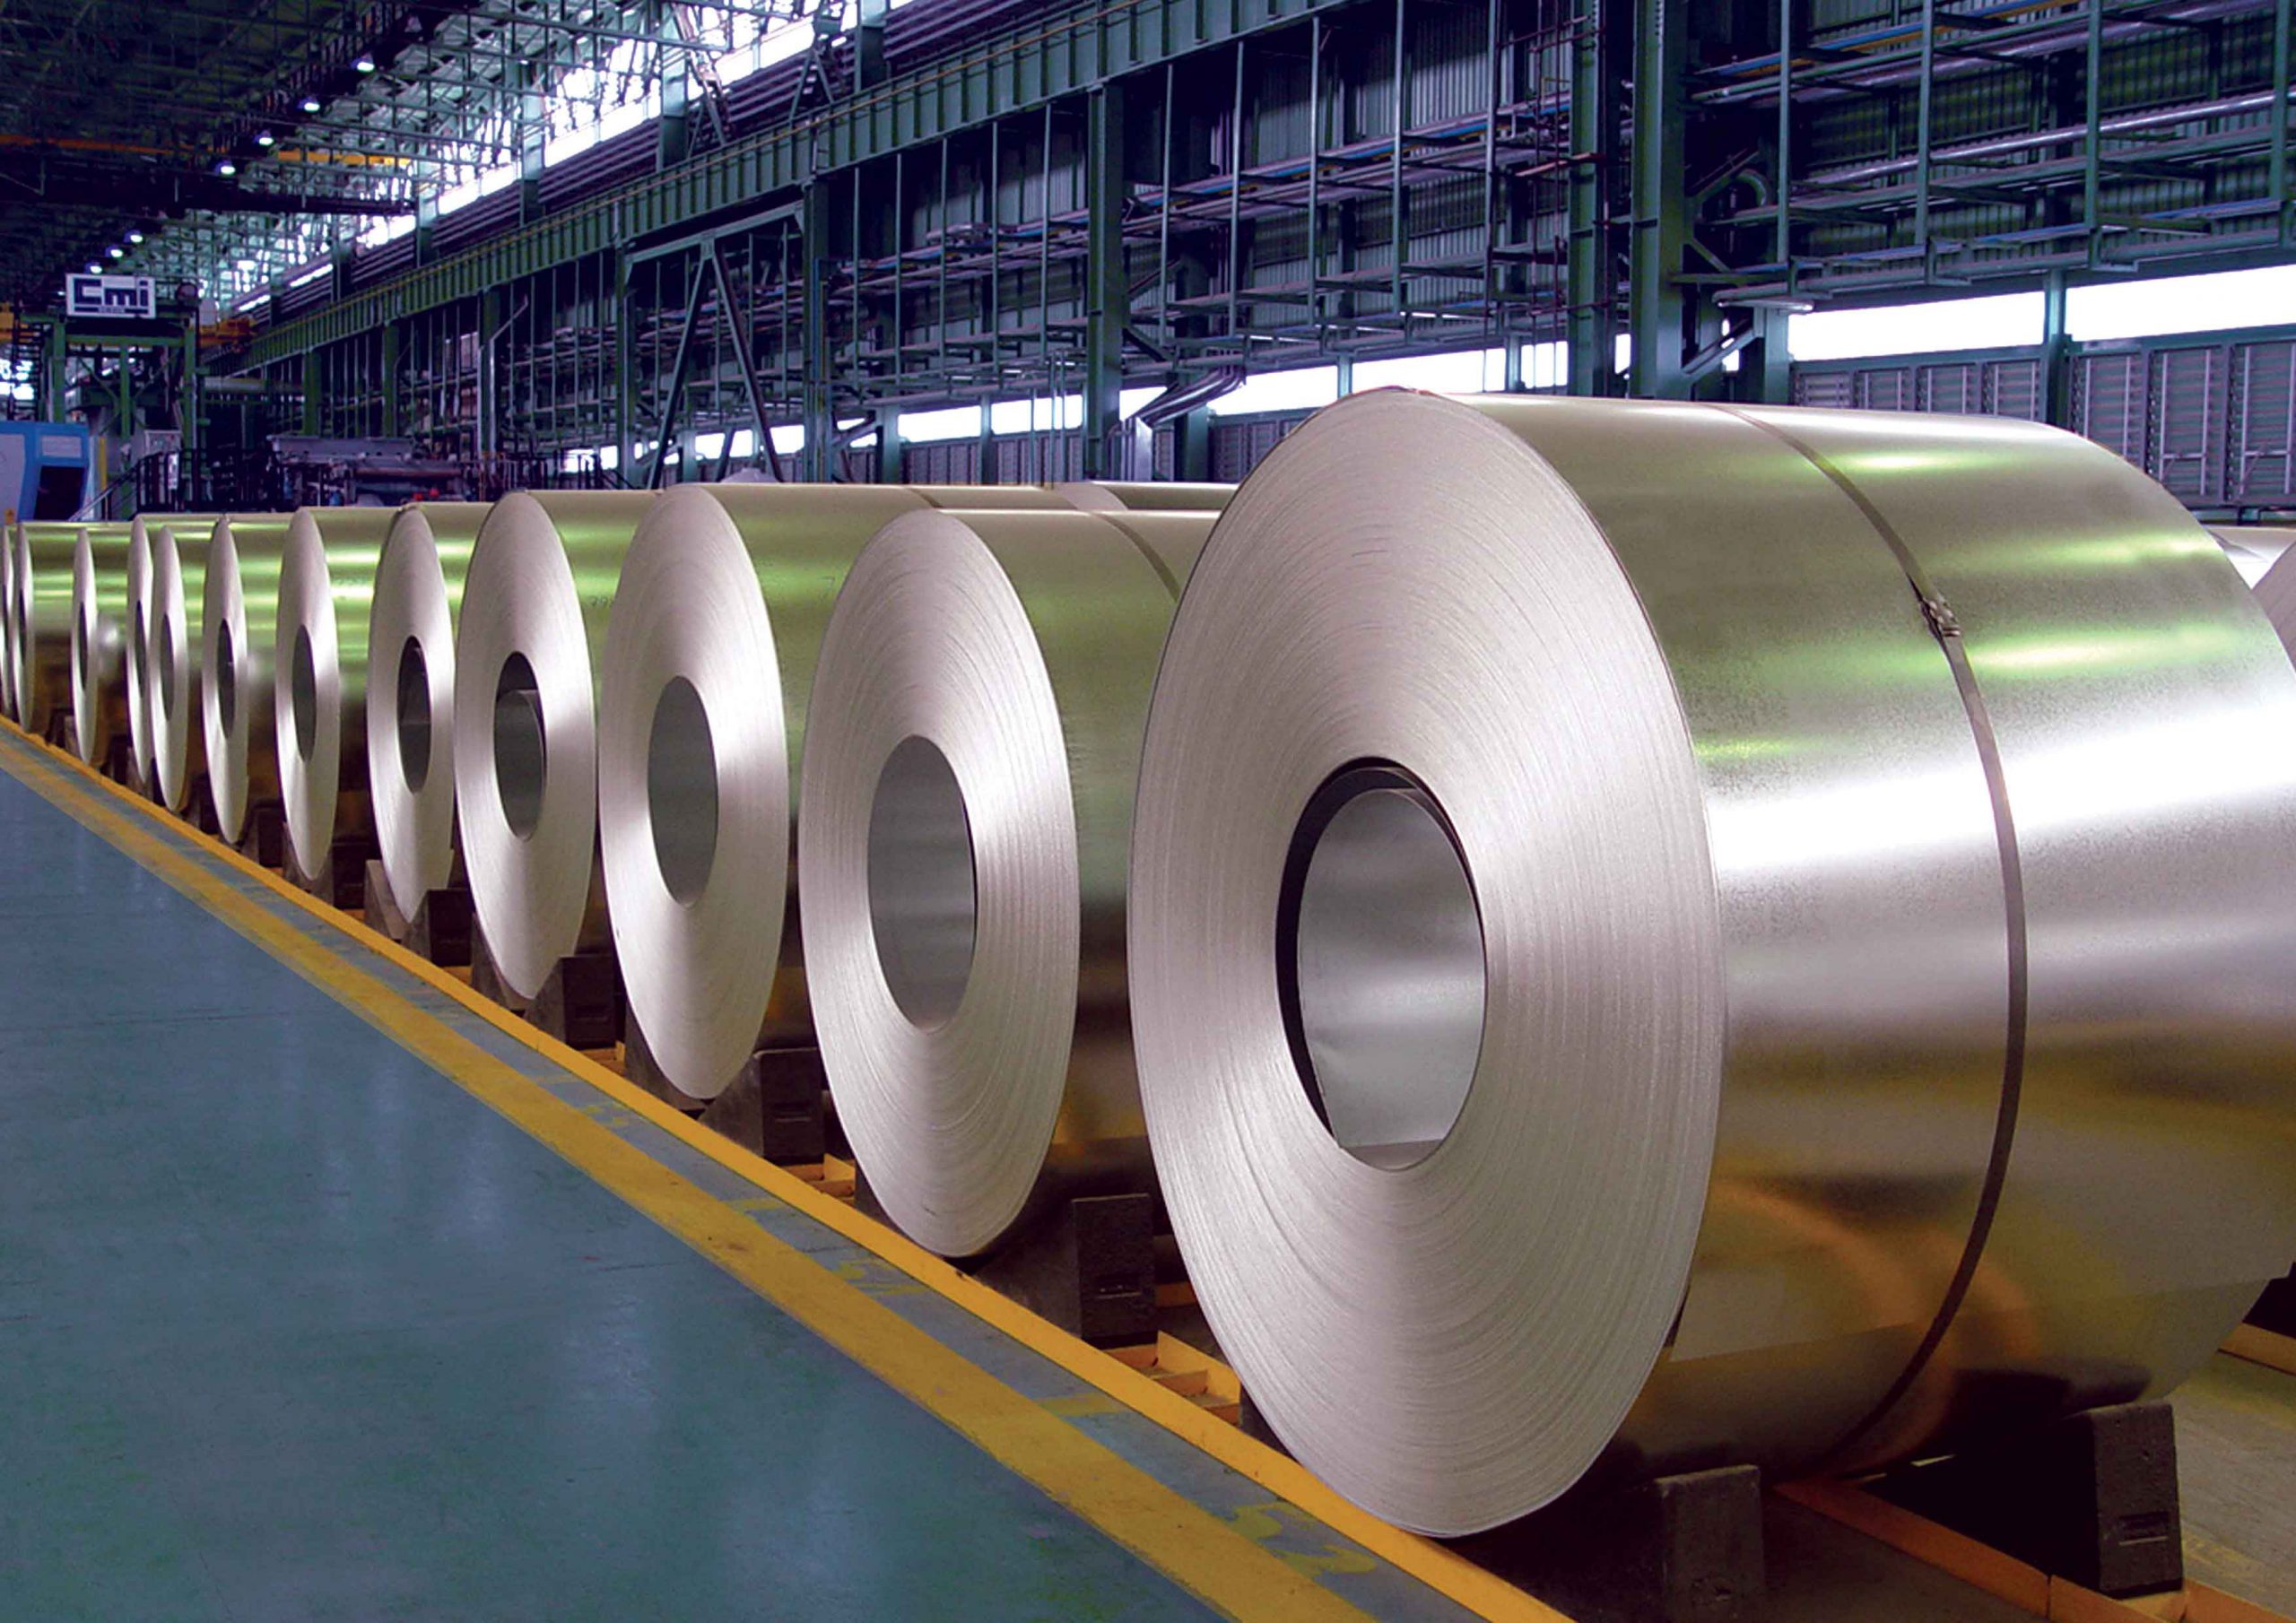 Iran’s 2-month steel output up 1.6%: ISPA